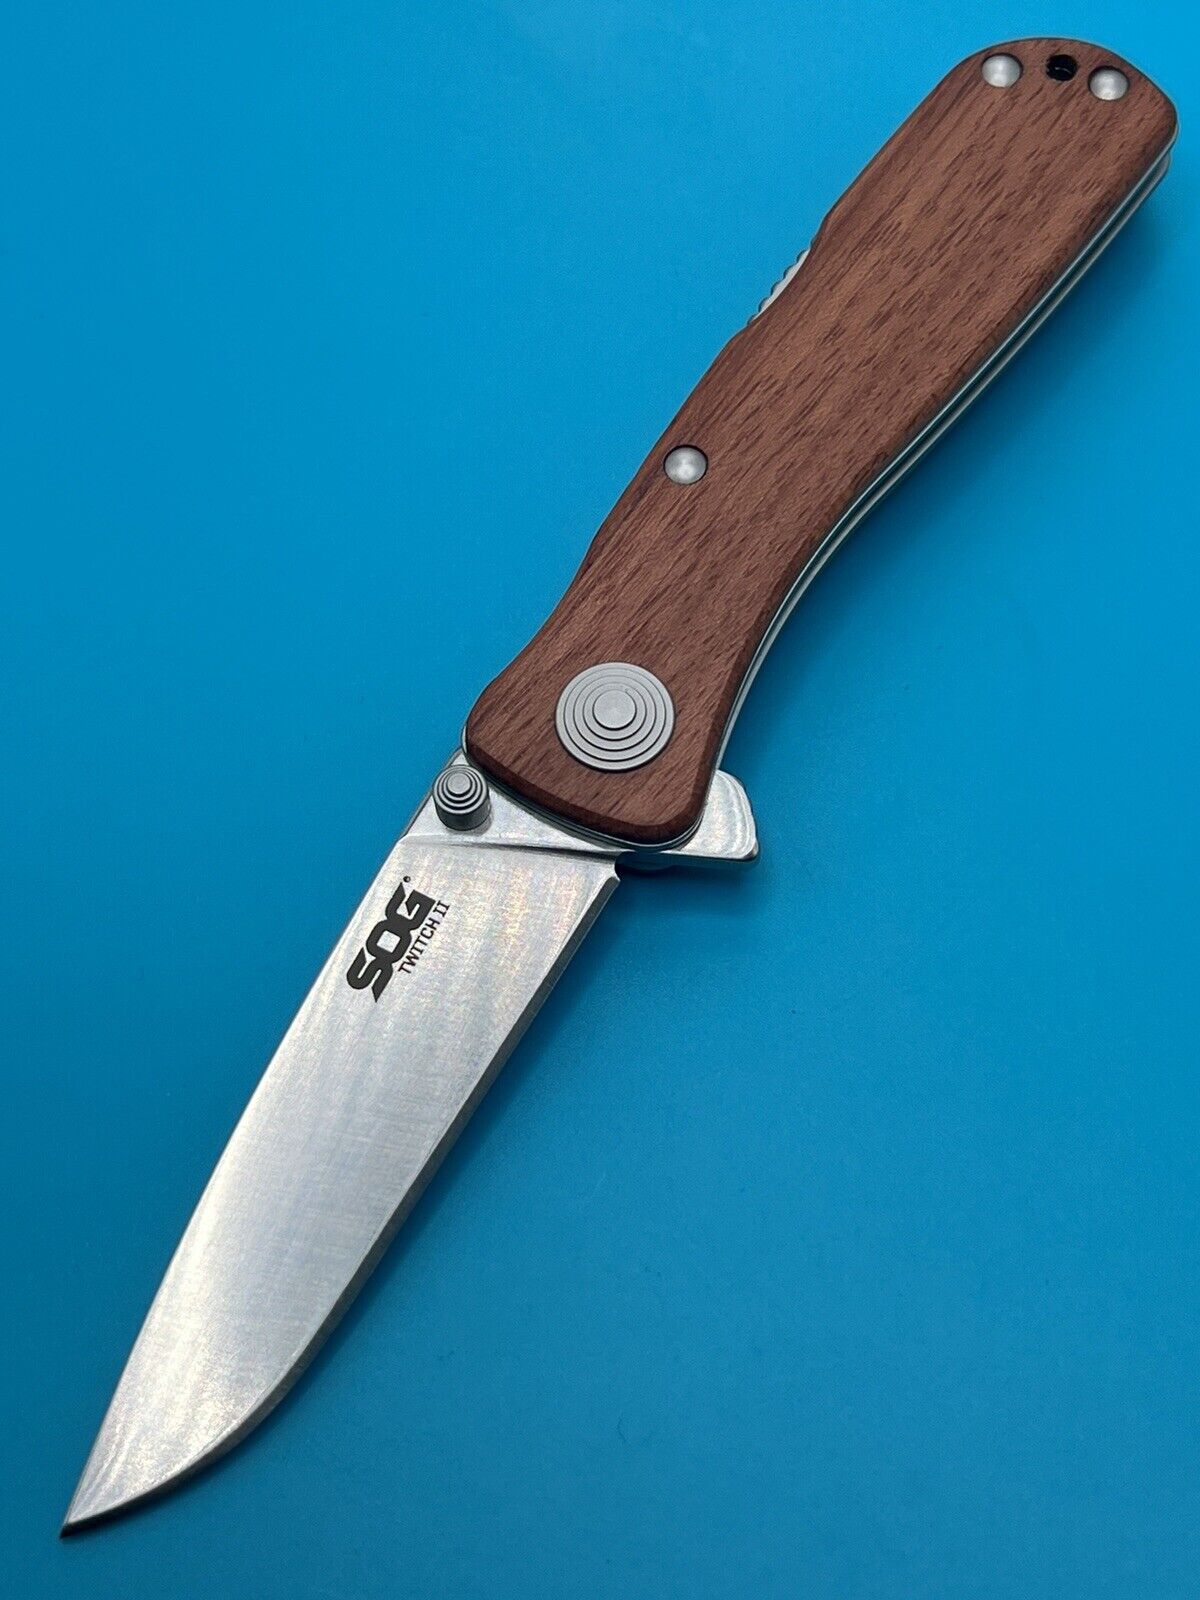 SOG Twitch II Wood Assisted Folding Pocket Knife - Excellent condition